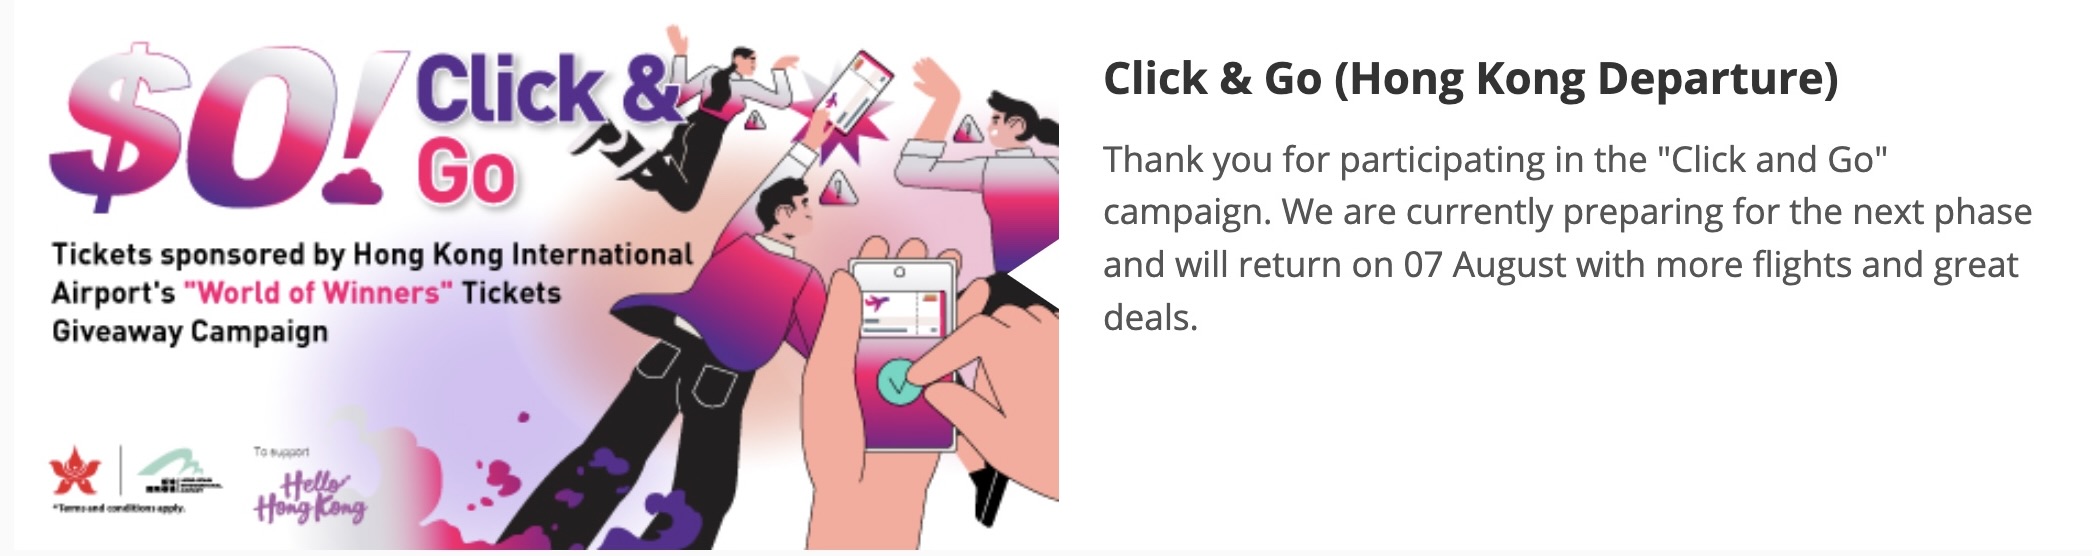 A screenshot from the Hong Kong Airlines website showing that the next round of the airline's Click & Go campaign will begin on August 2.